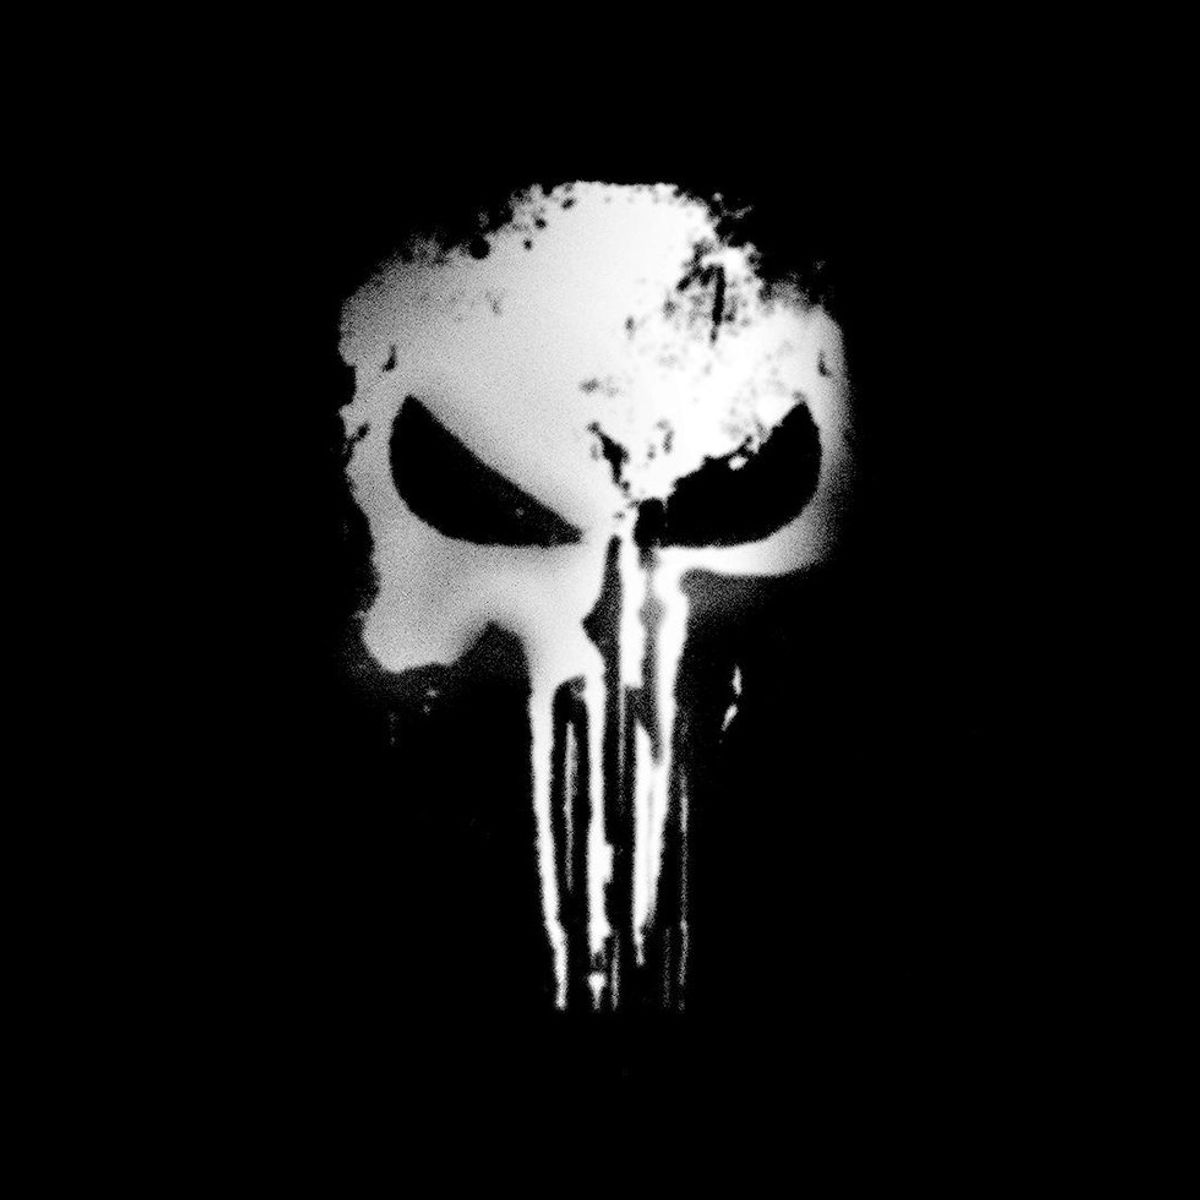 What to Expect From "Marvel's The Punisher?"